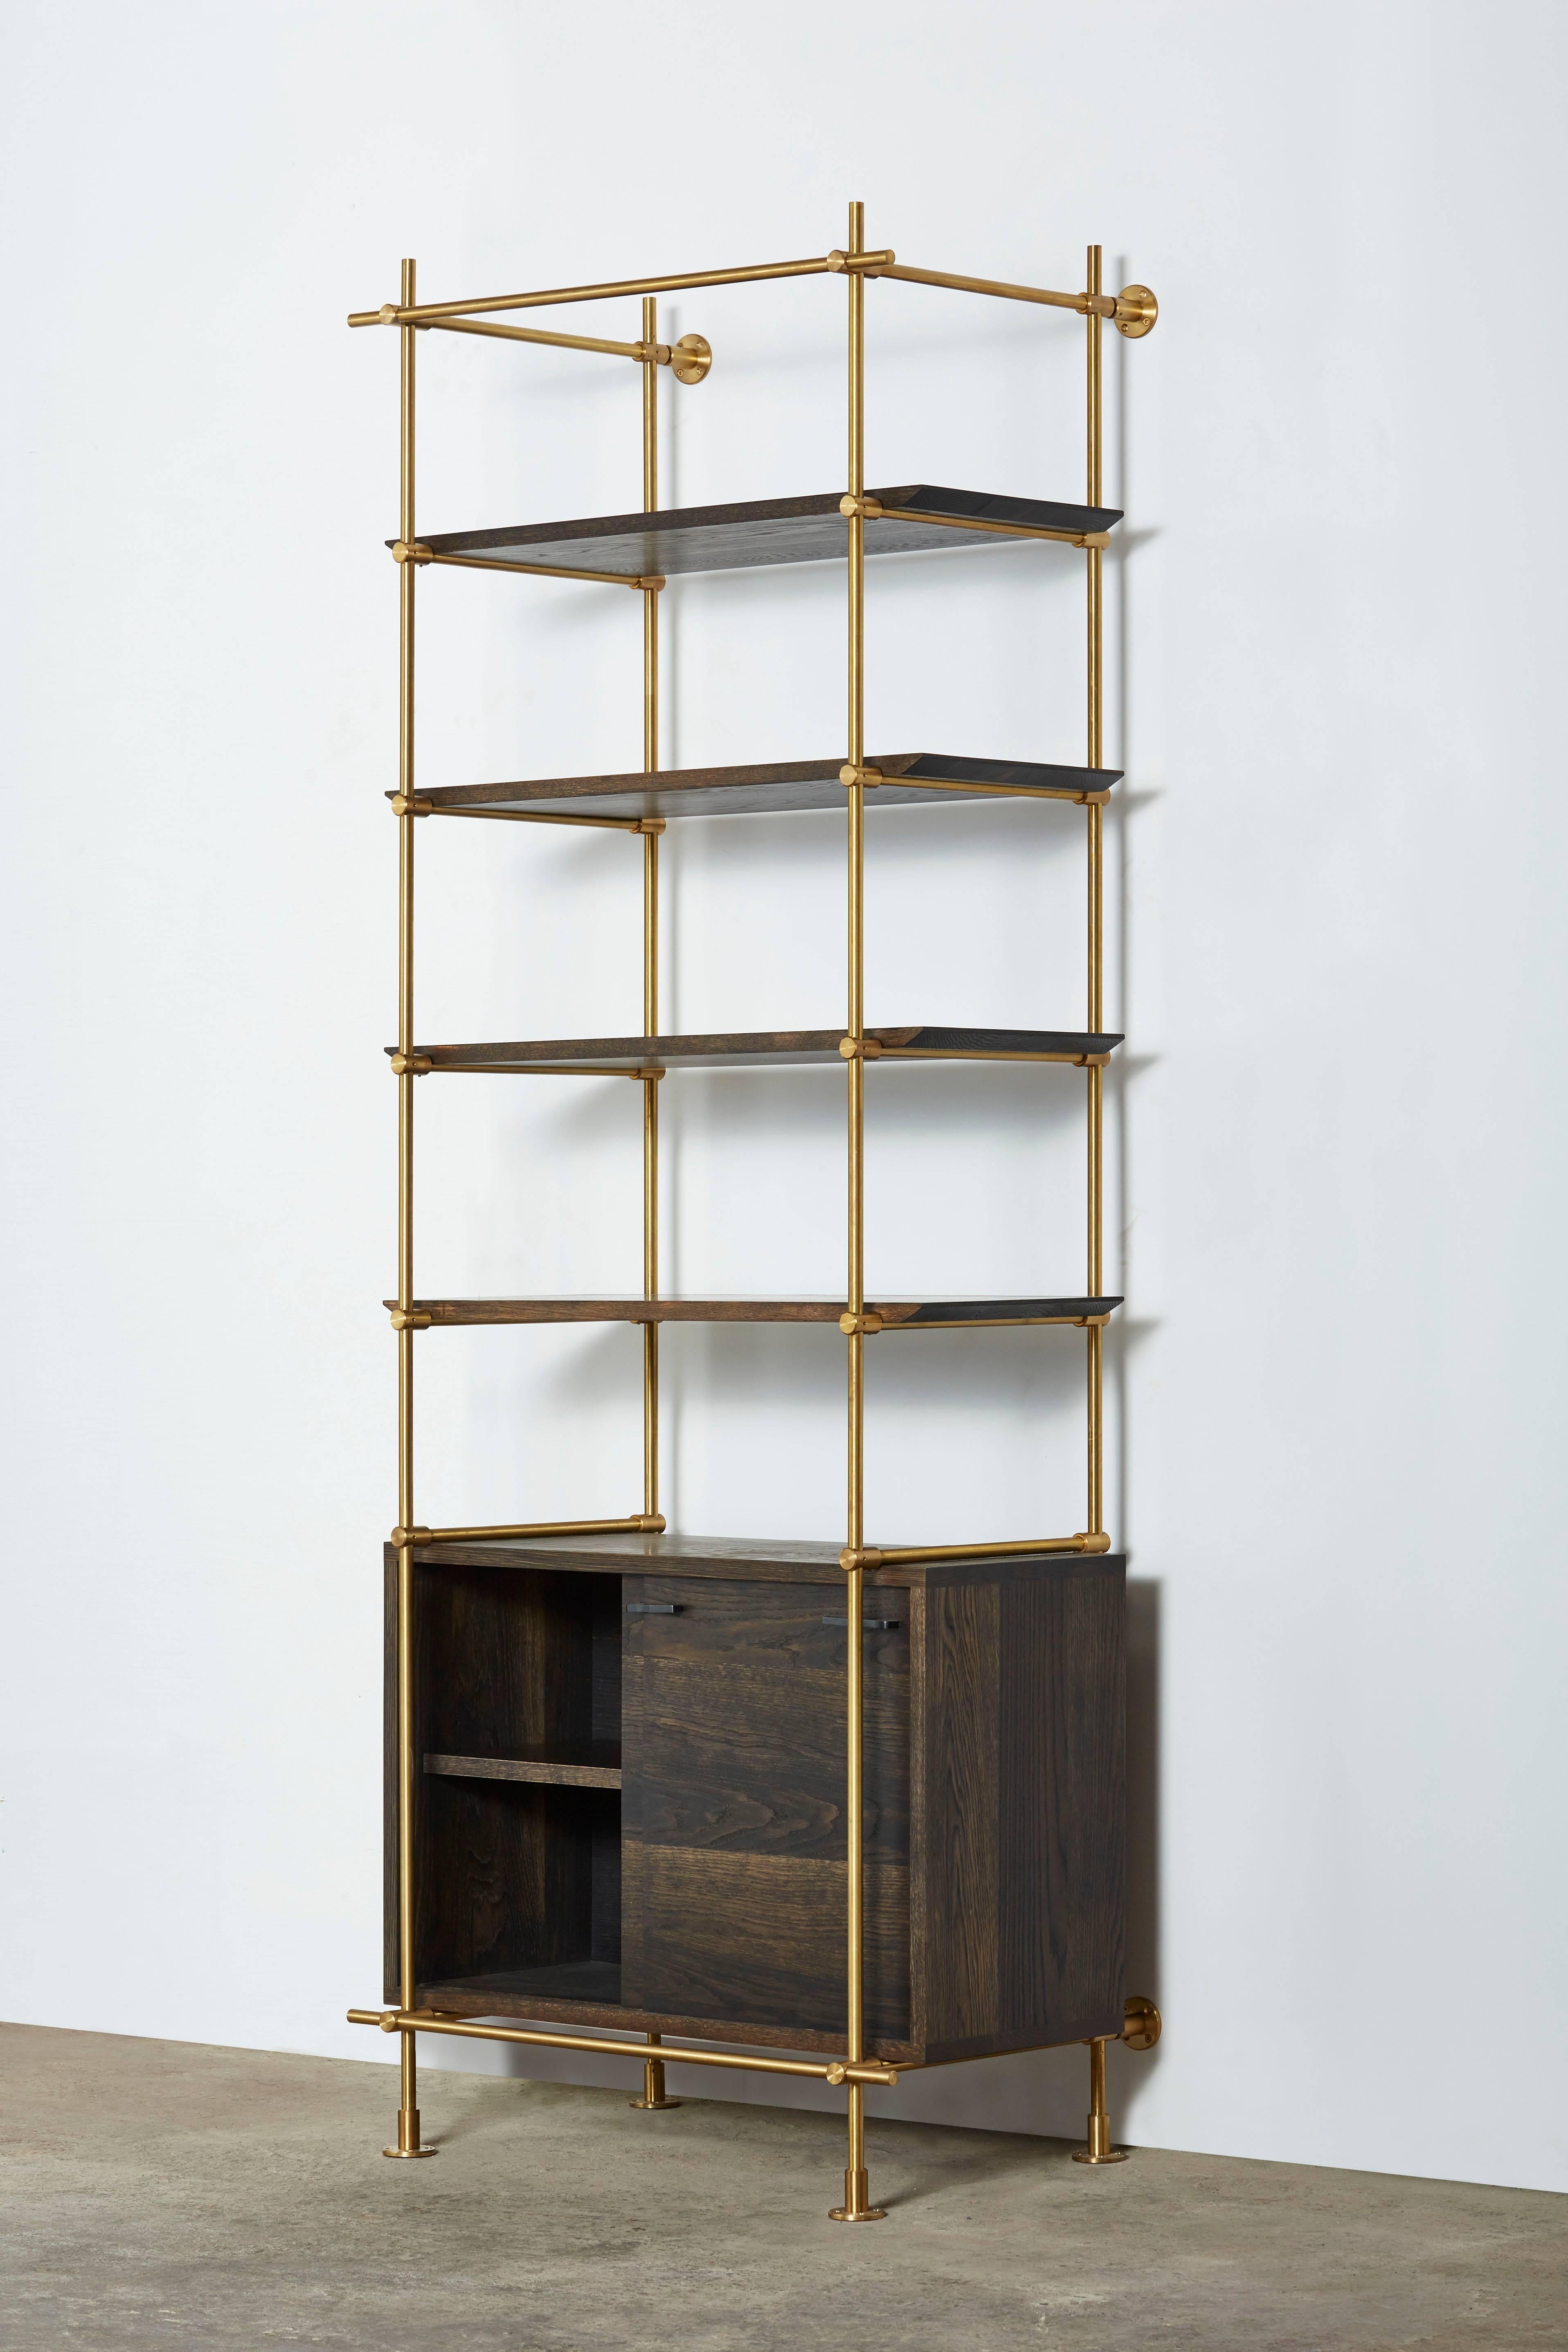 This single bay version of Amuneal’s collector’s shelving unit features solid machined brass fittings and posts in a warm brass finish. The unit mounts to the floor and to the wall to support a series of easily adjustable shelves and credenza